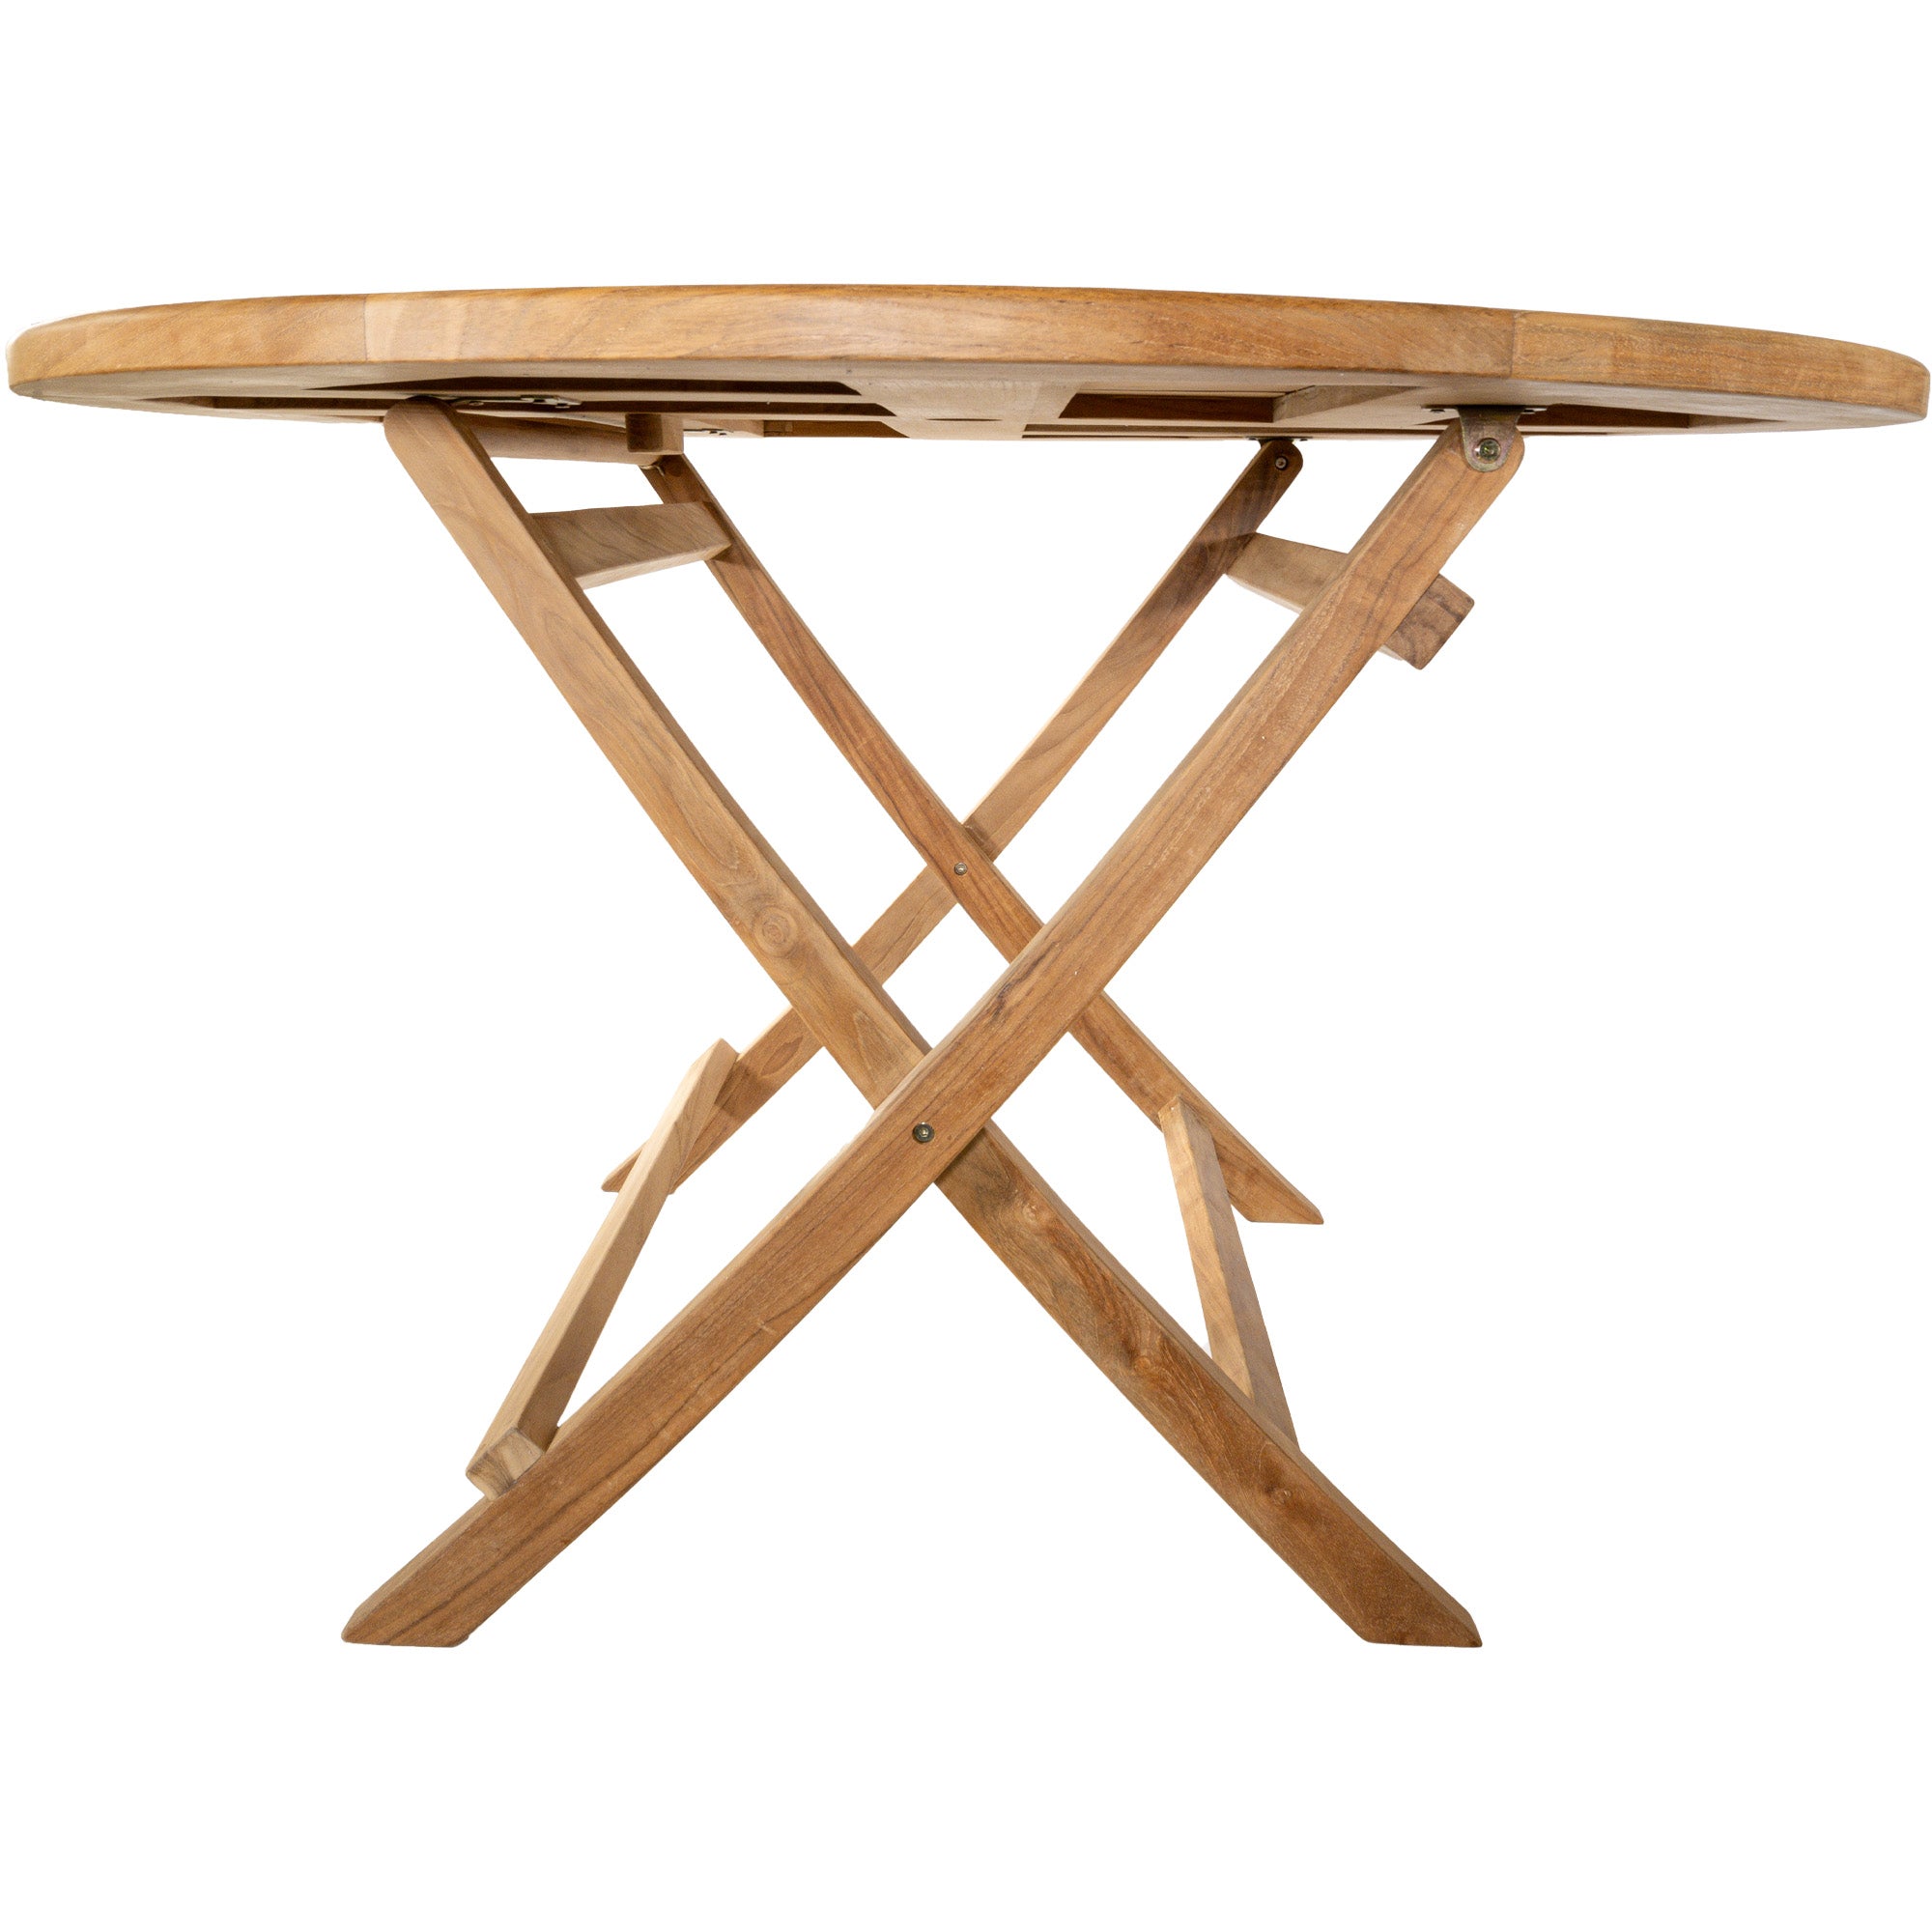 Naples Natural Teak Outdoor Foldable Round Dining Table - 47"